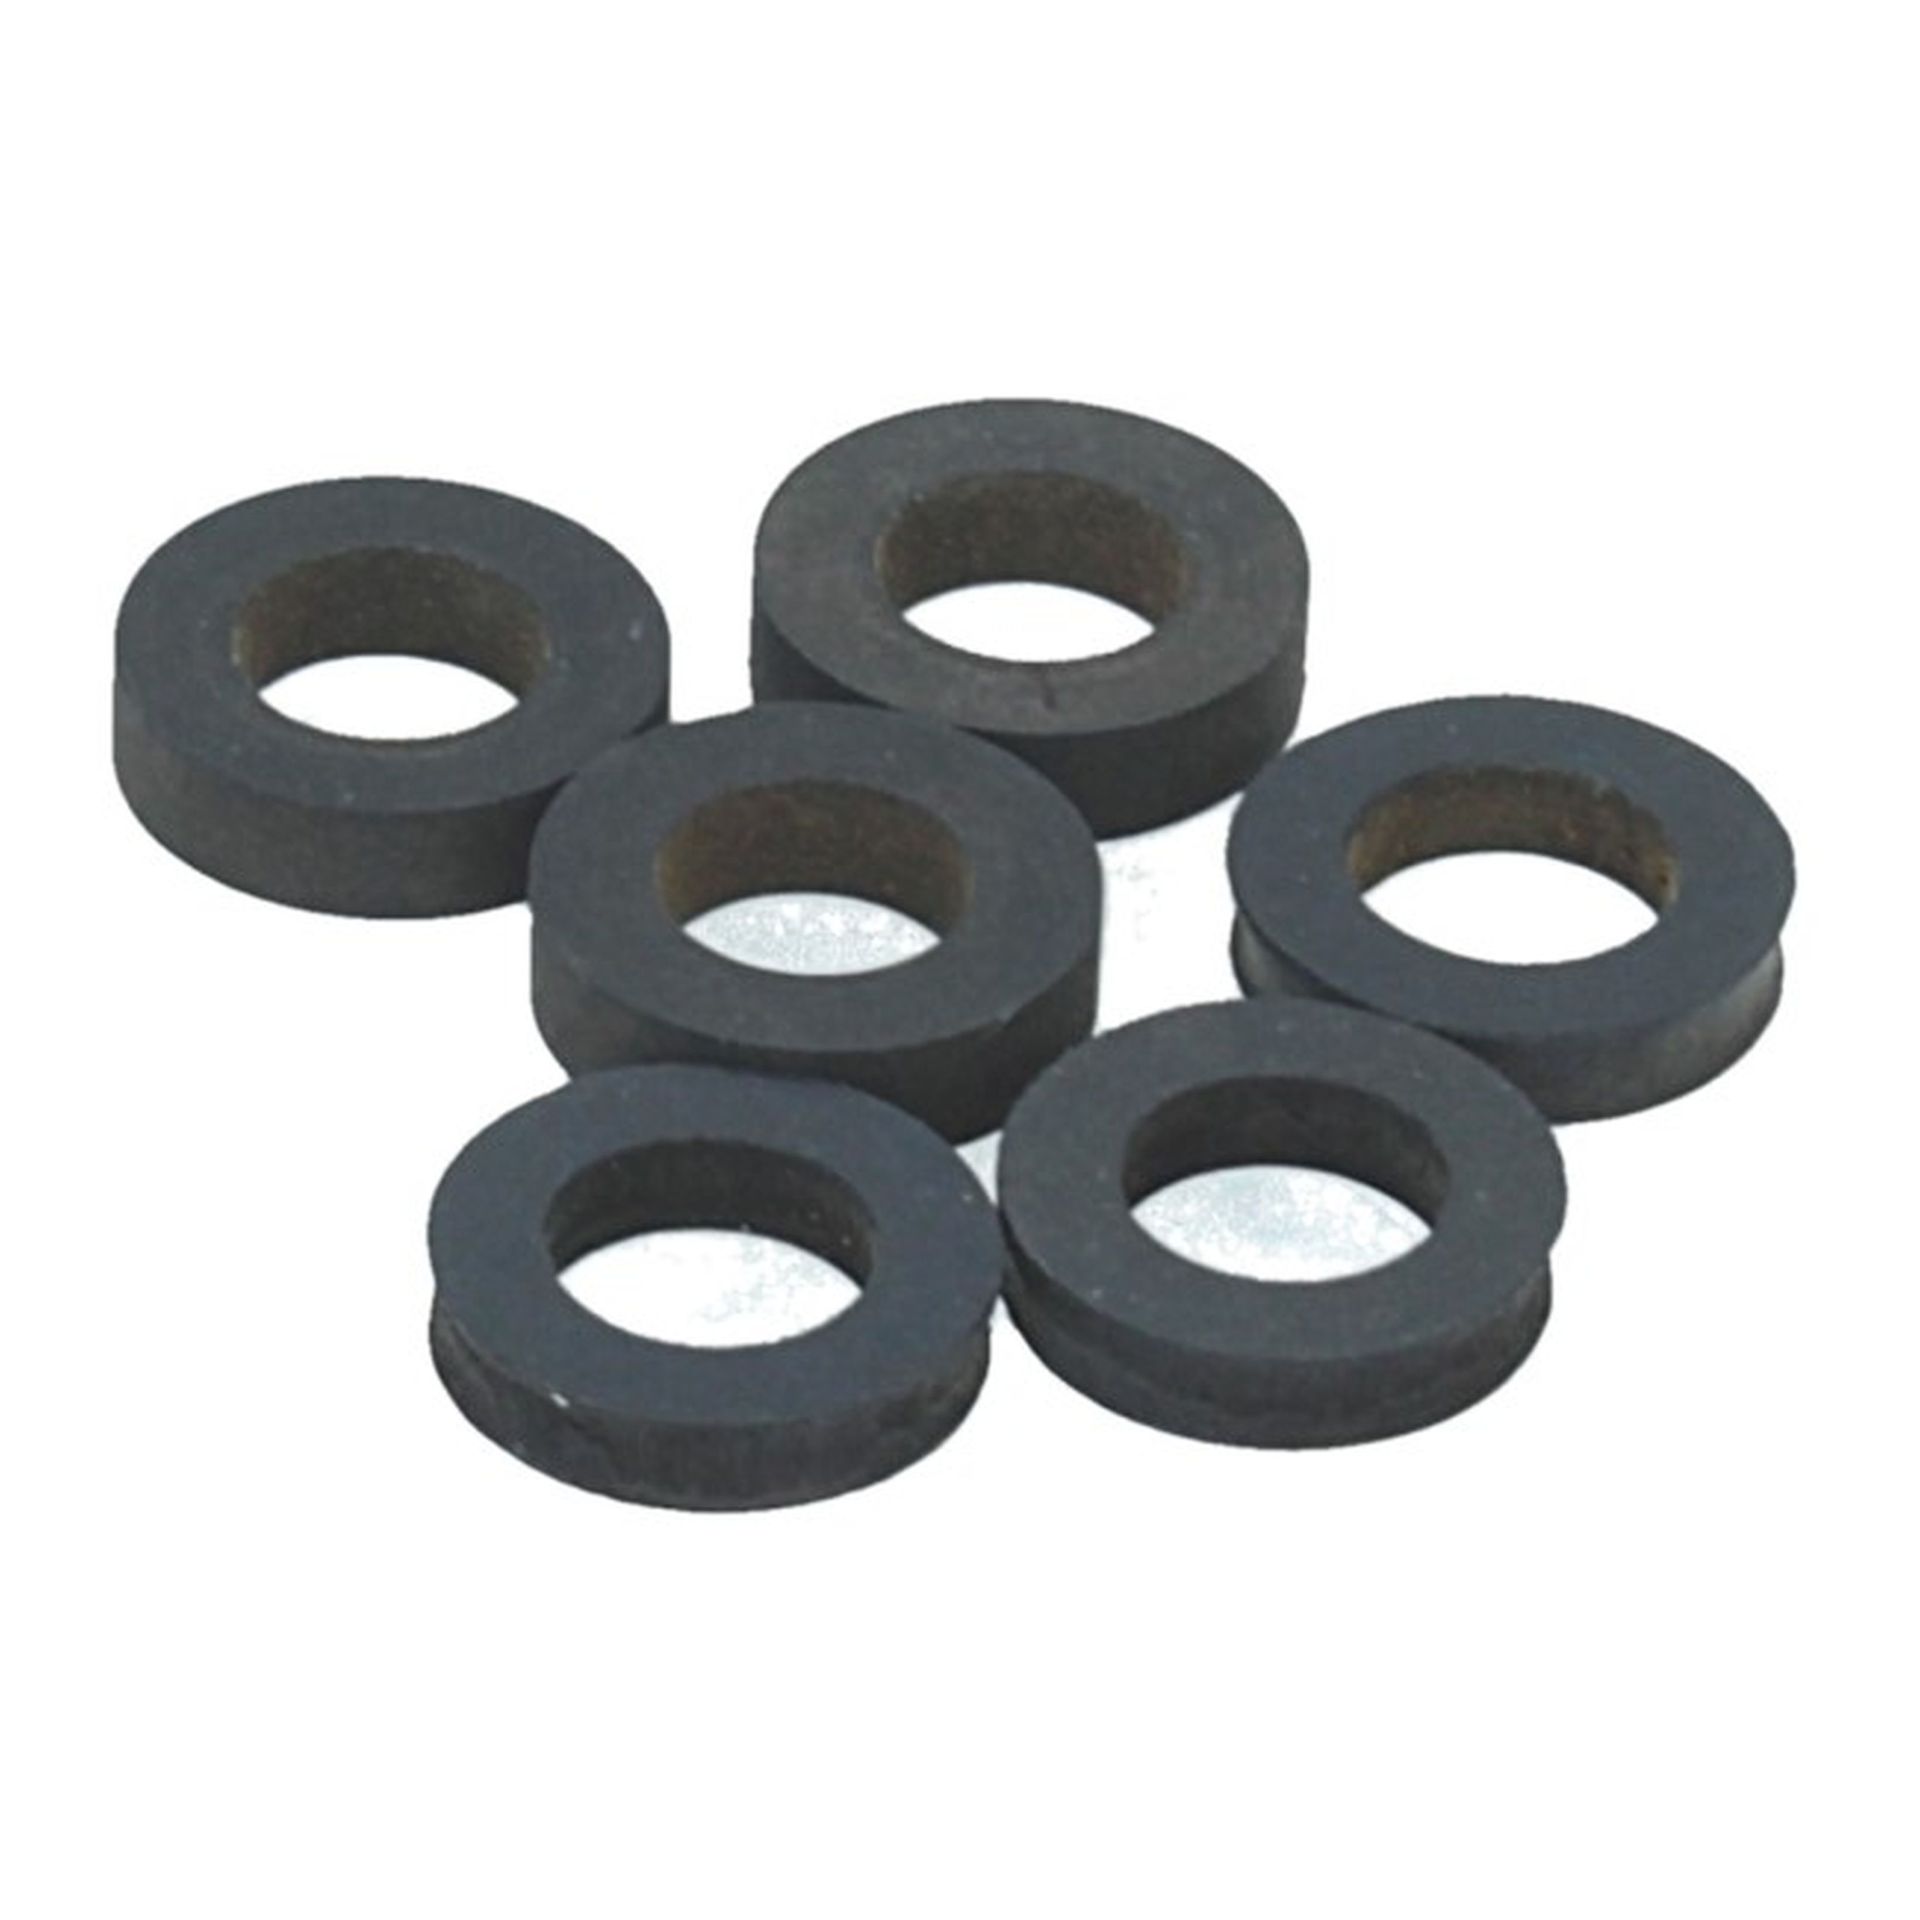 Square Section Oil Seal For Head Location Dowel 8/14/3.5